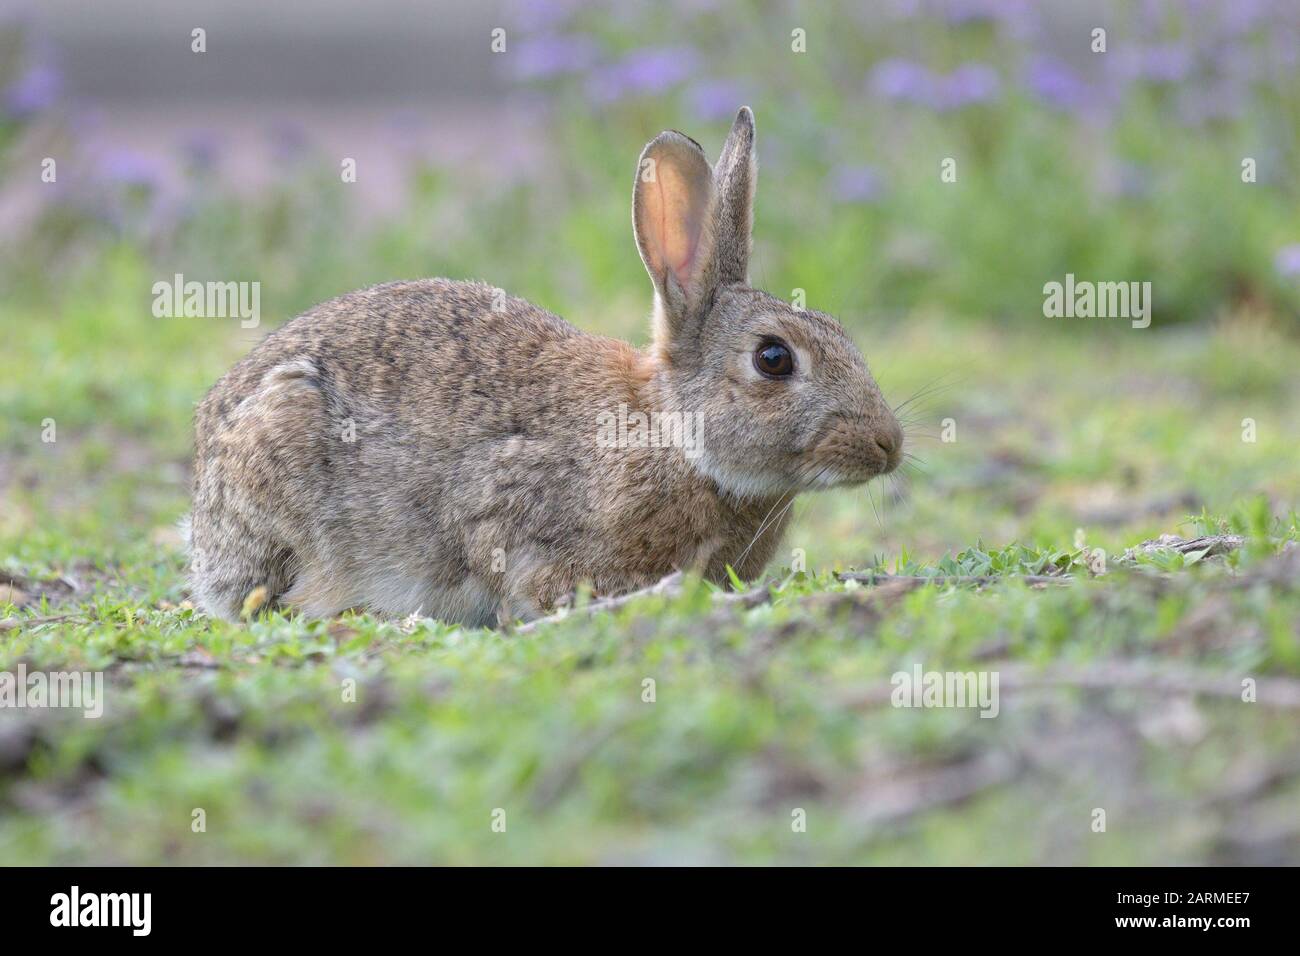 A wild rabbit in Australia, an introduced species Stock Photo